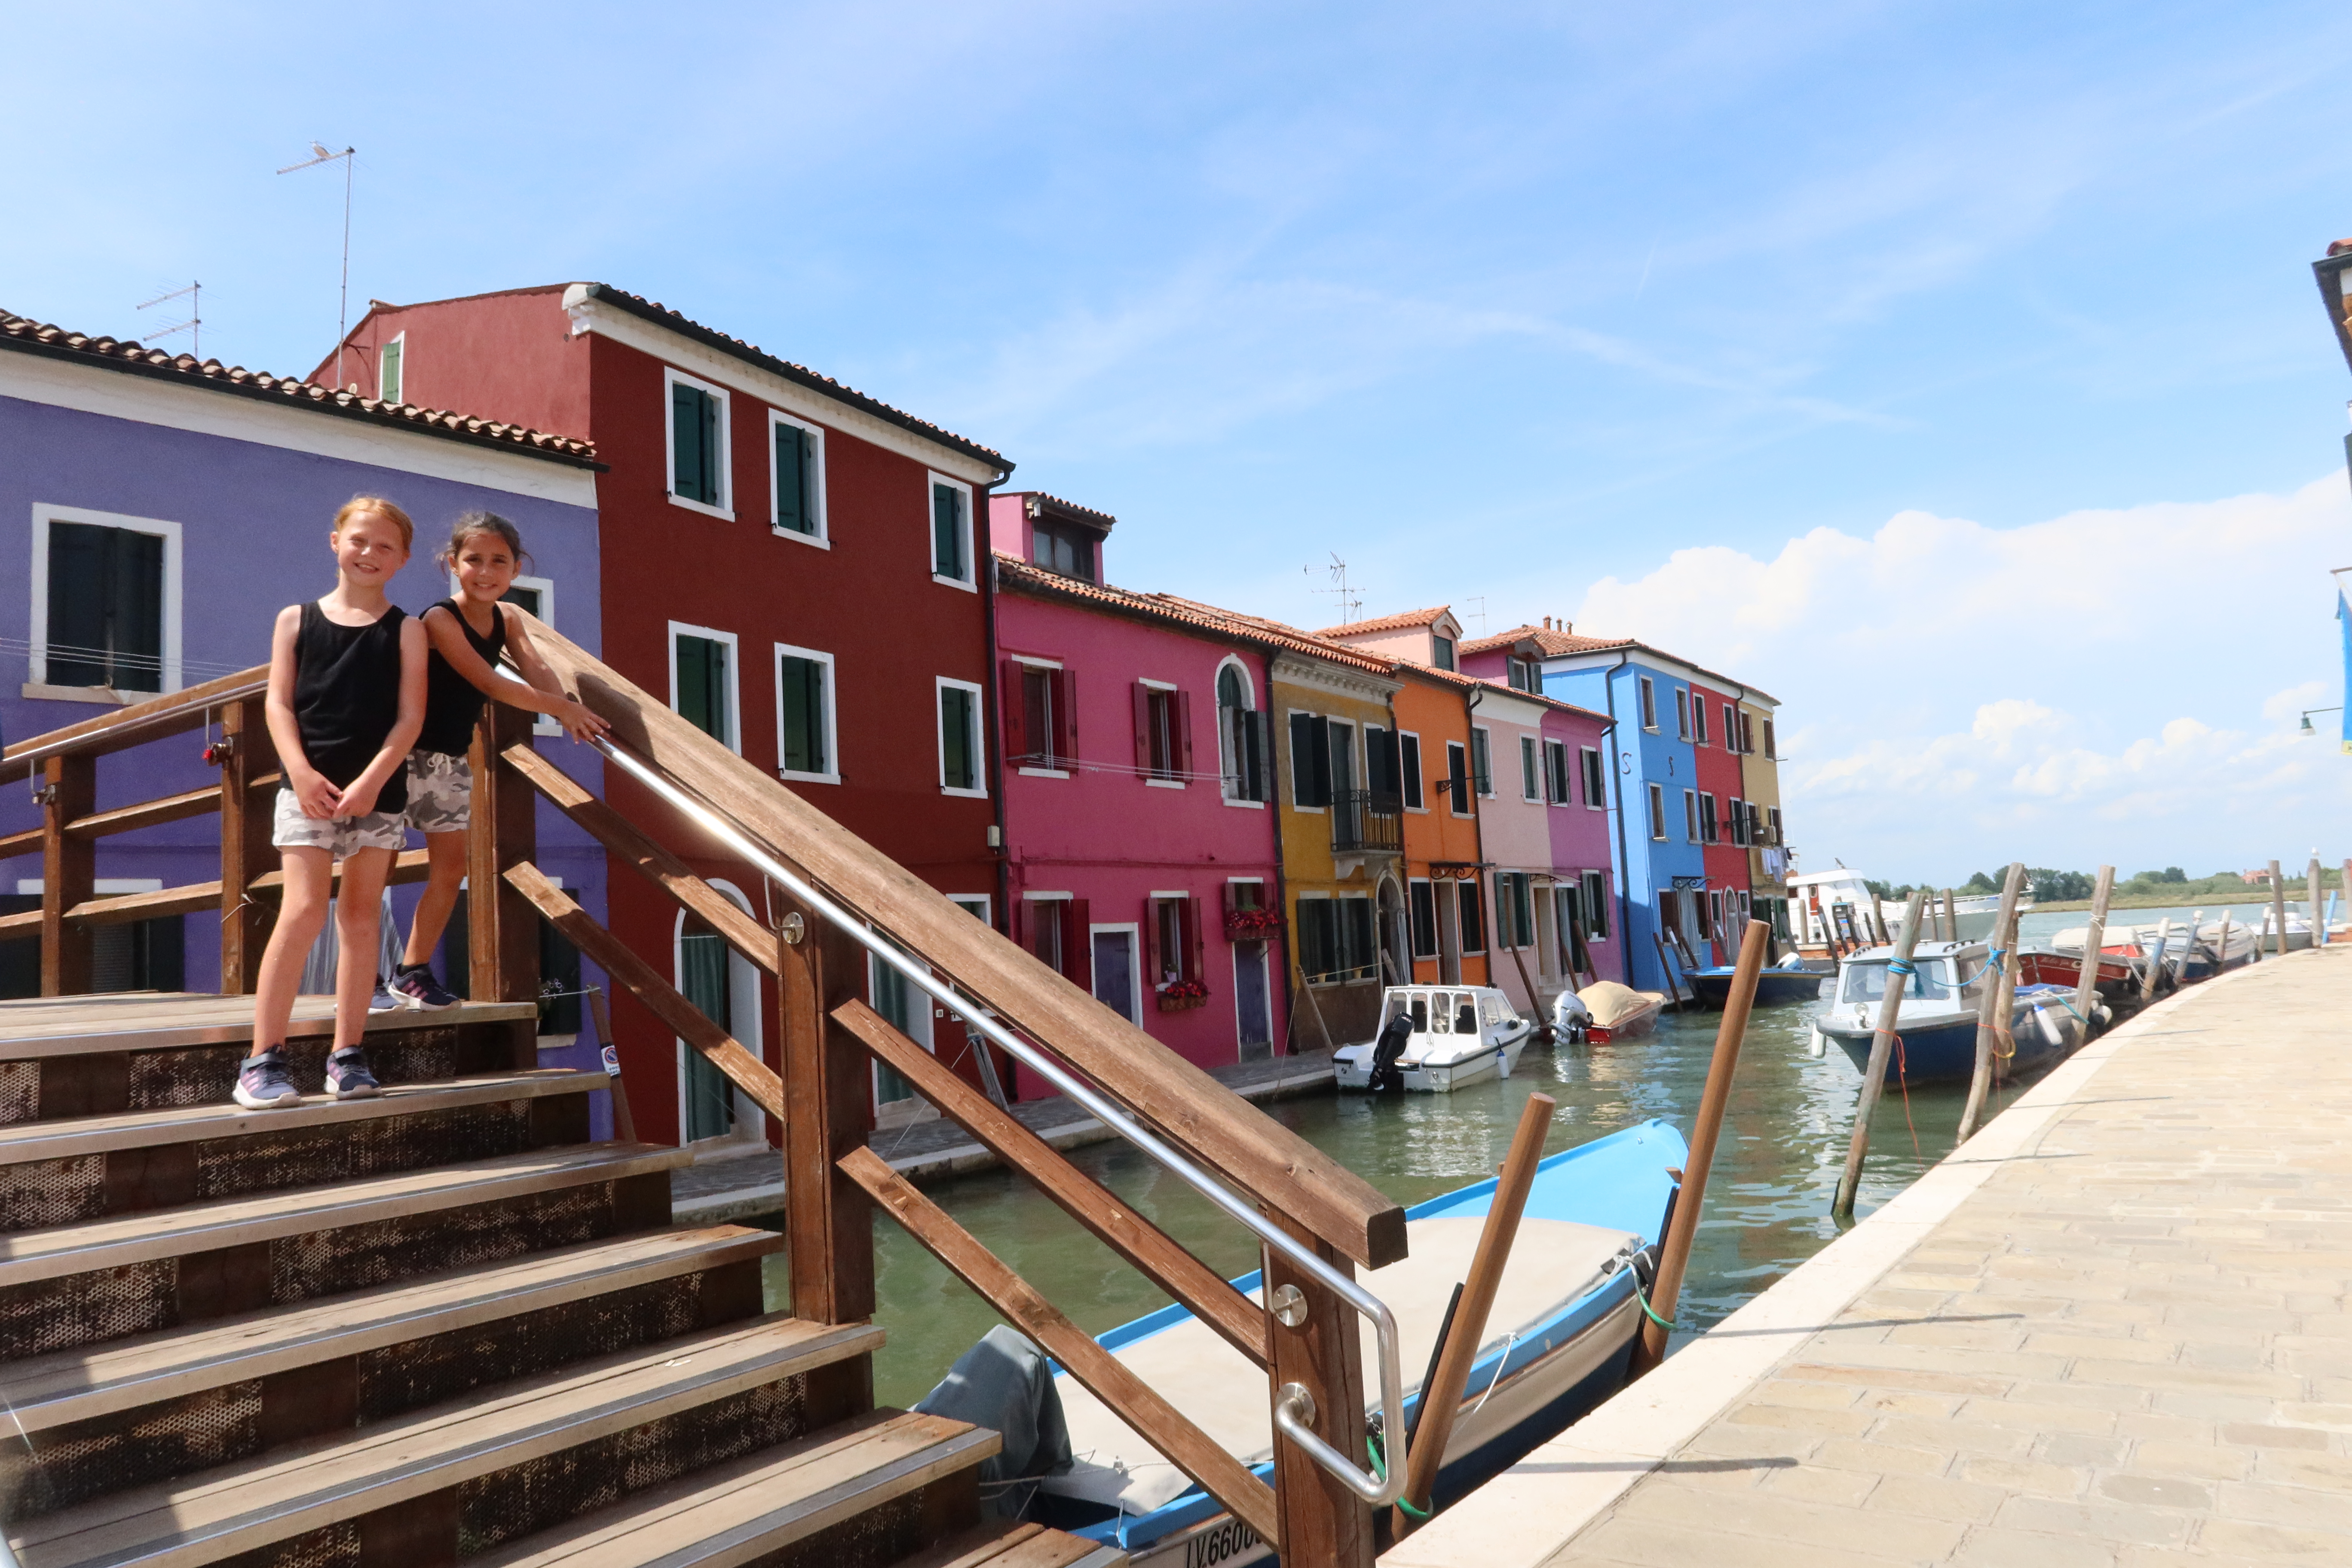 Burano Colored Houses - One Weekend in Venice with Kids